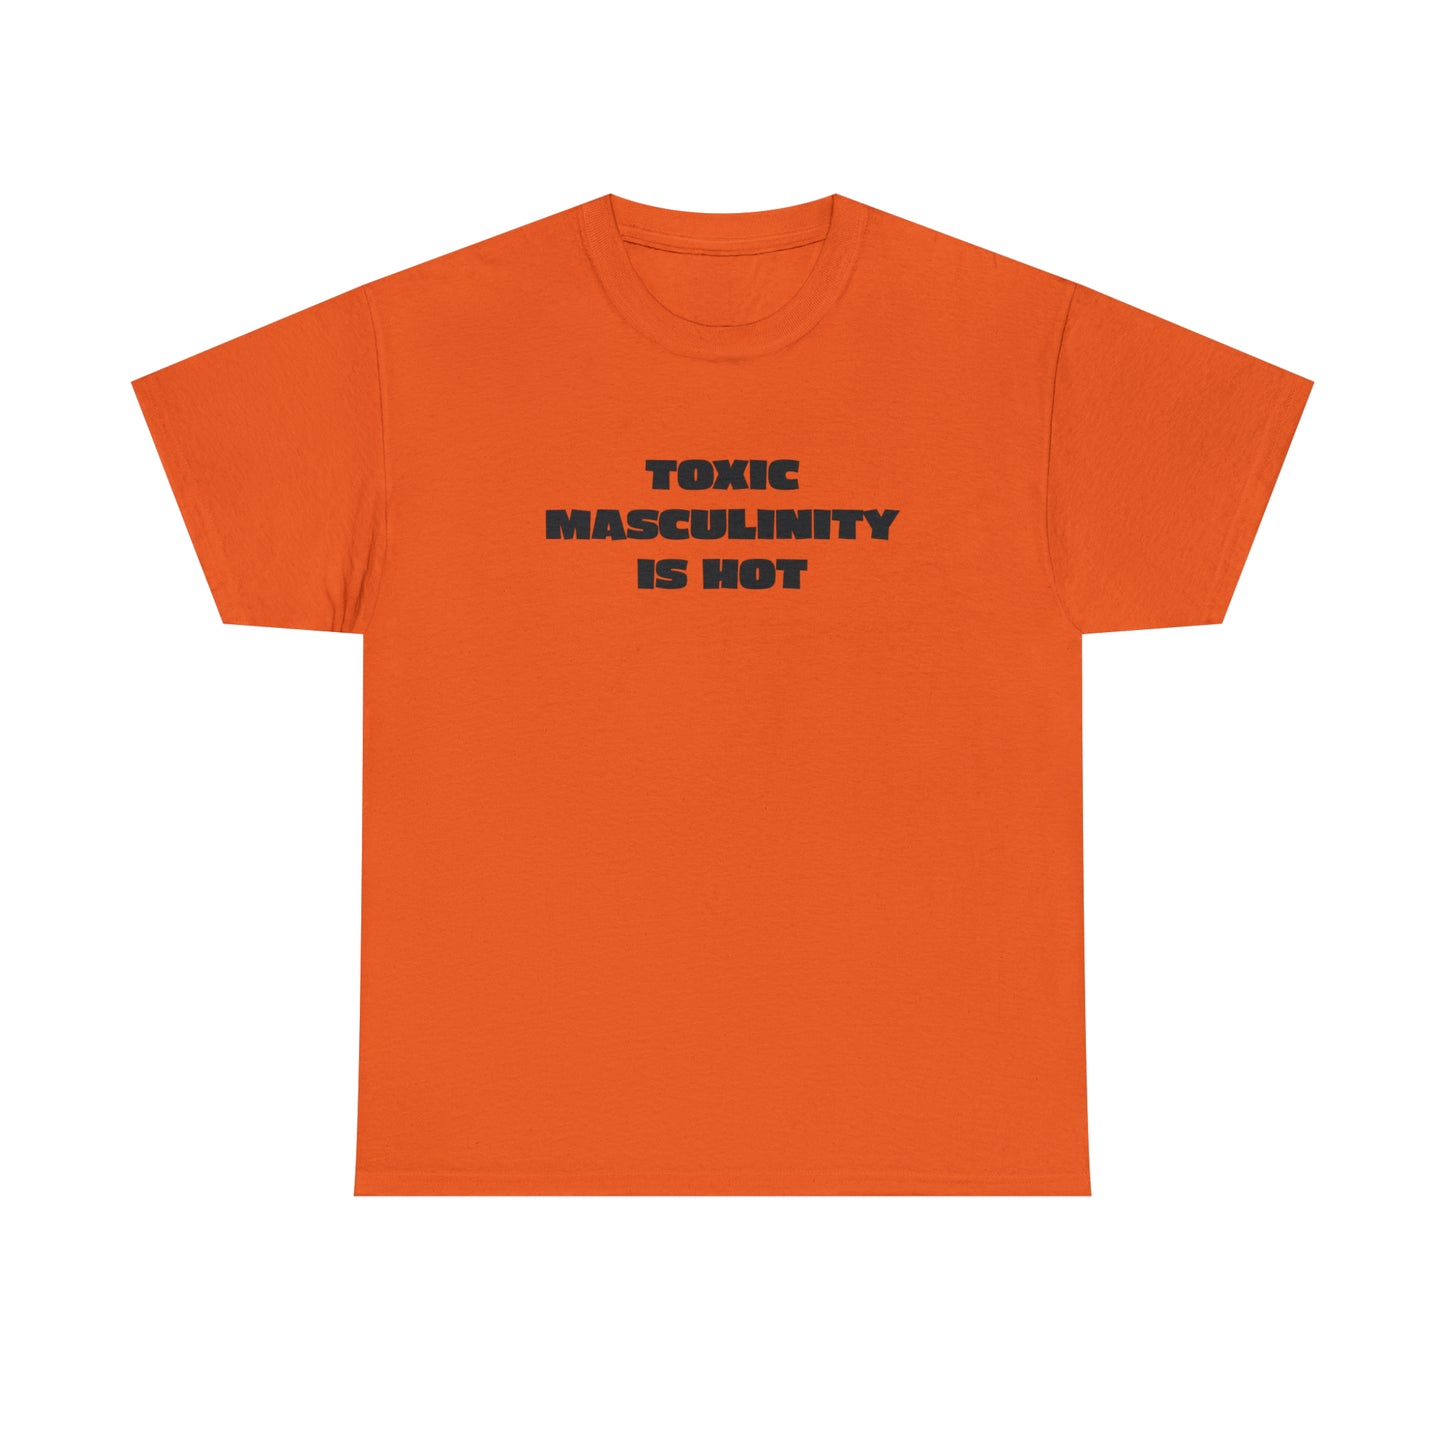 Toxic Masculinity T Shirt For Conservative T-Shirt For Rebel TShirt For Freedom Of Speech Tee